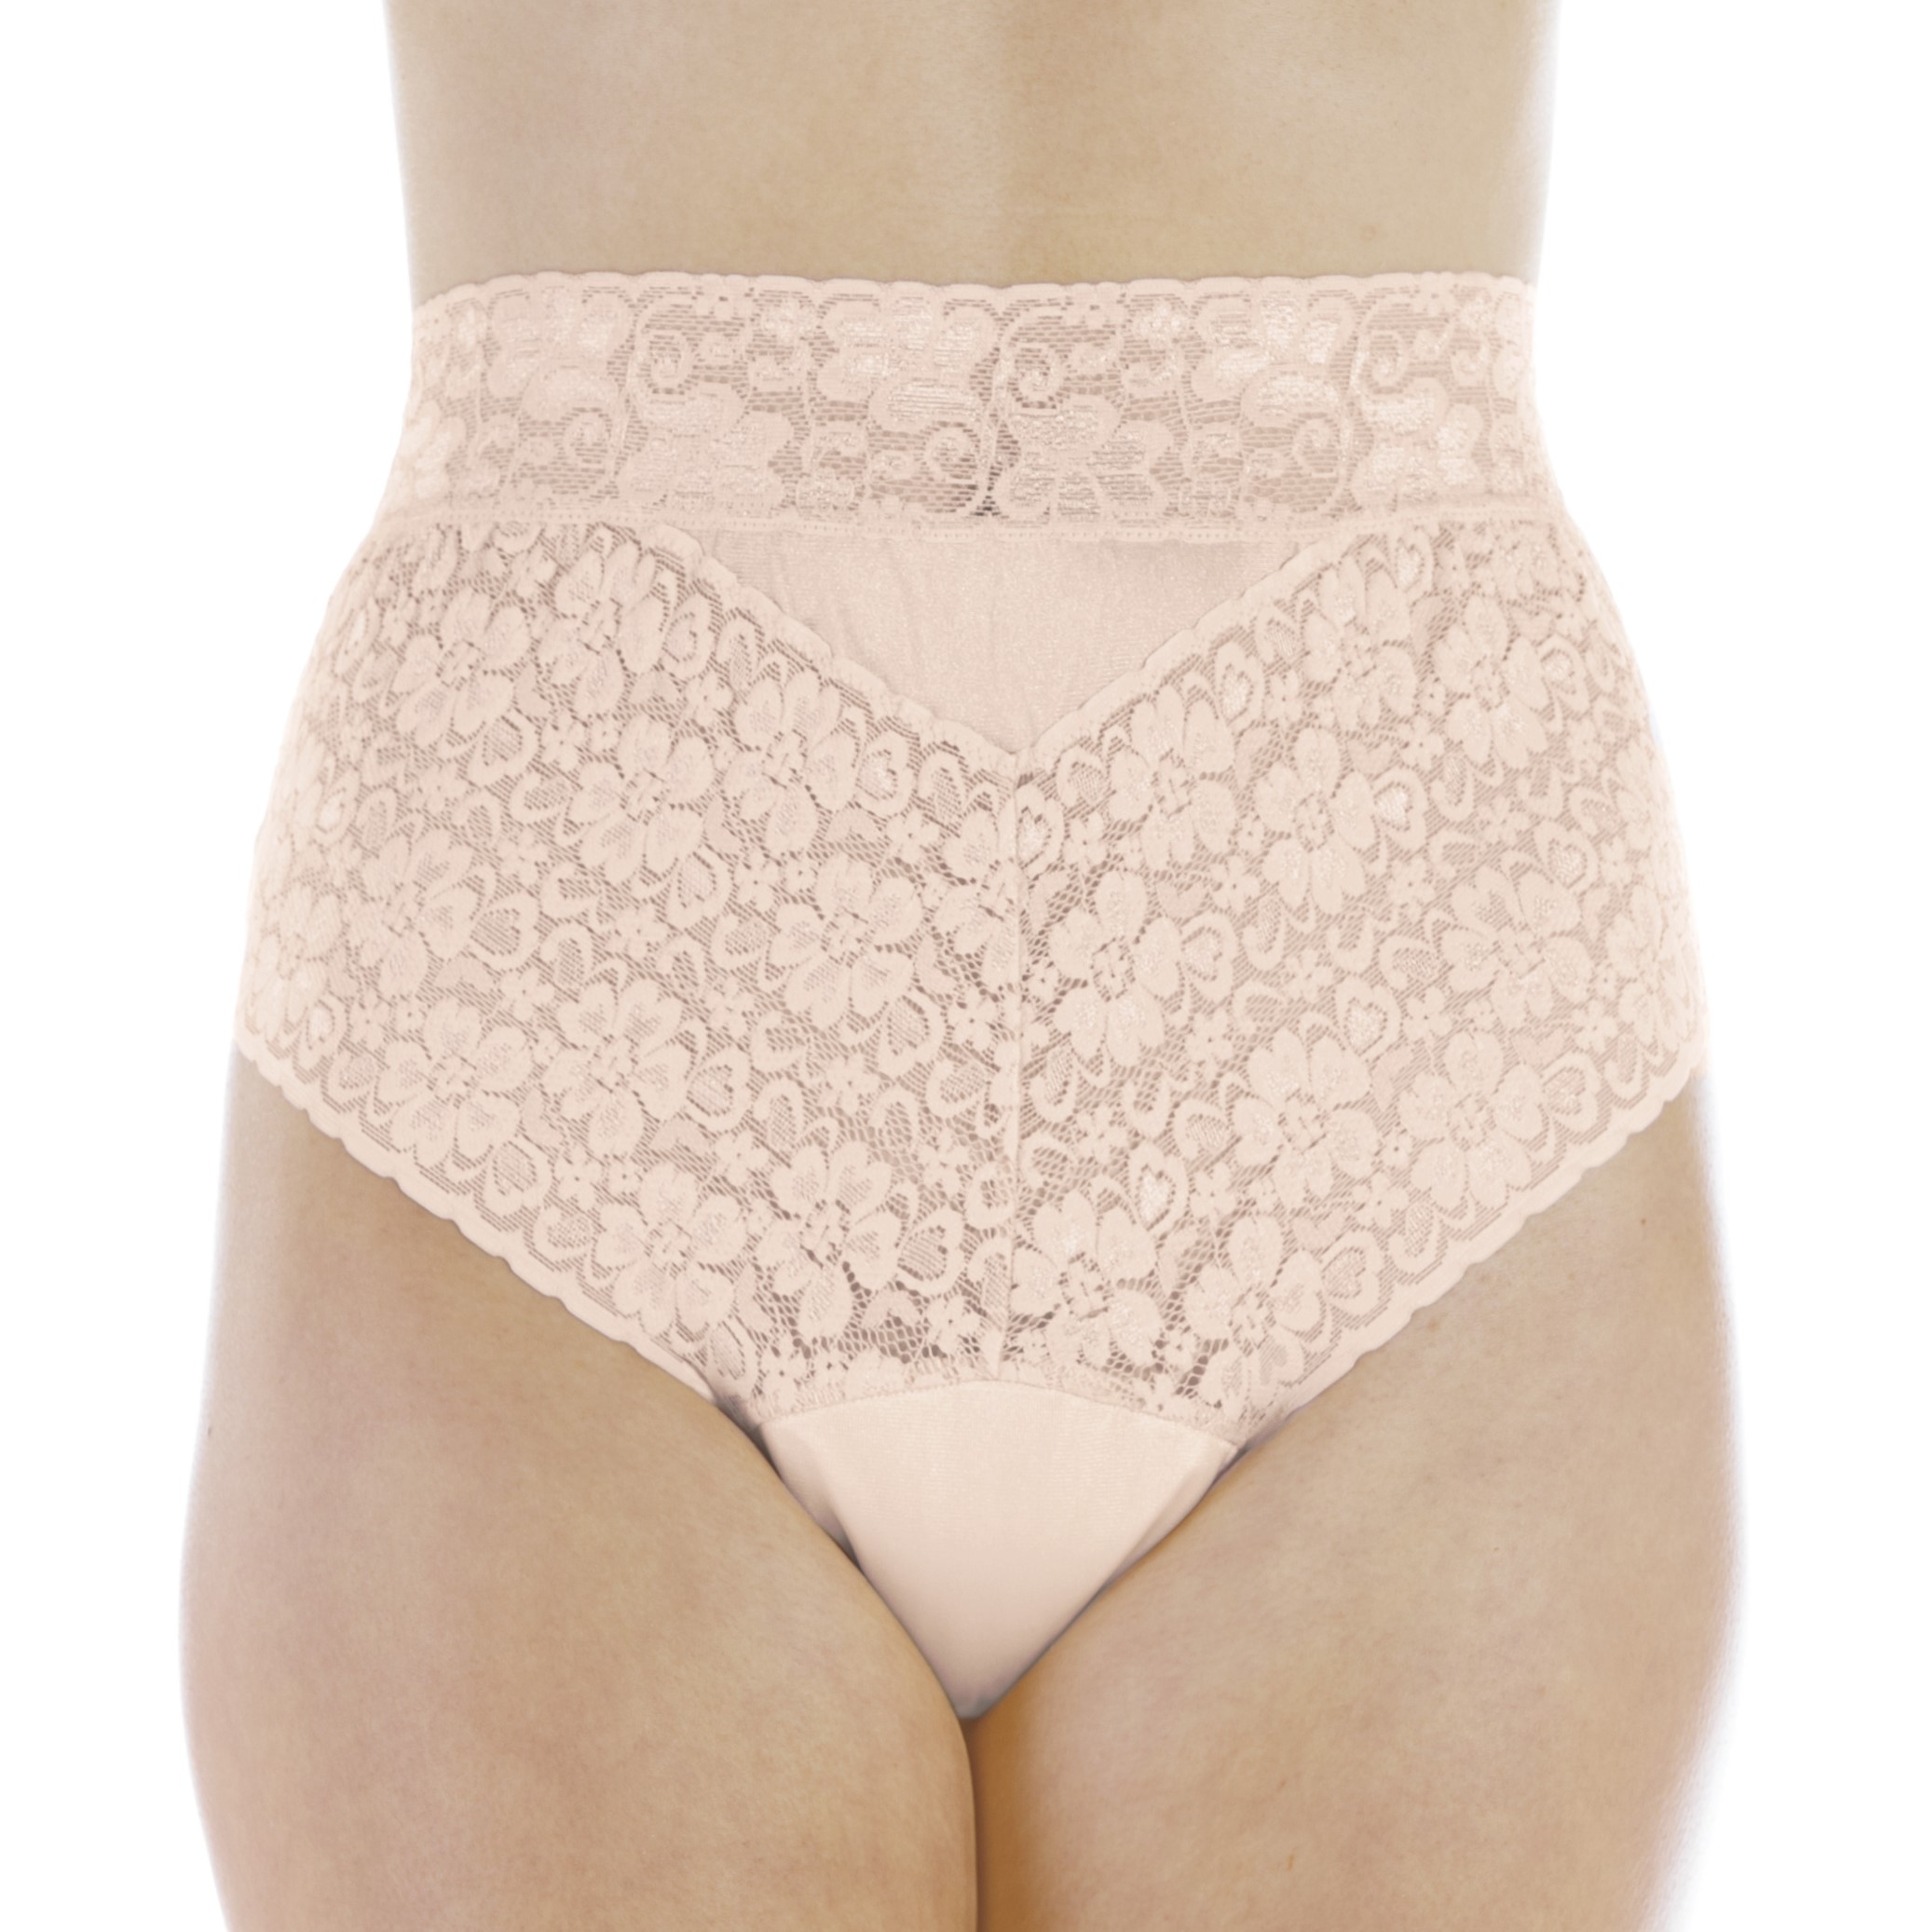 Renova Tummy Control Panty With Lace,lightweight, seamless fit provides  all-day comfort. (as1, alpha, s, regular, regular, Cocoa) at  Women's  Clothing store